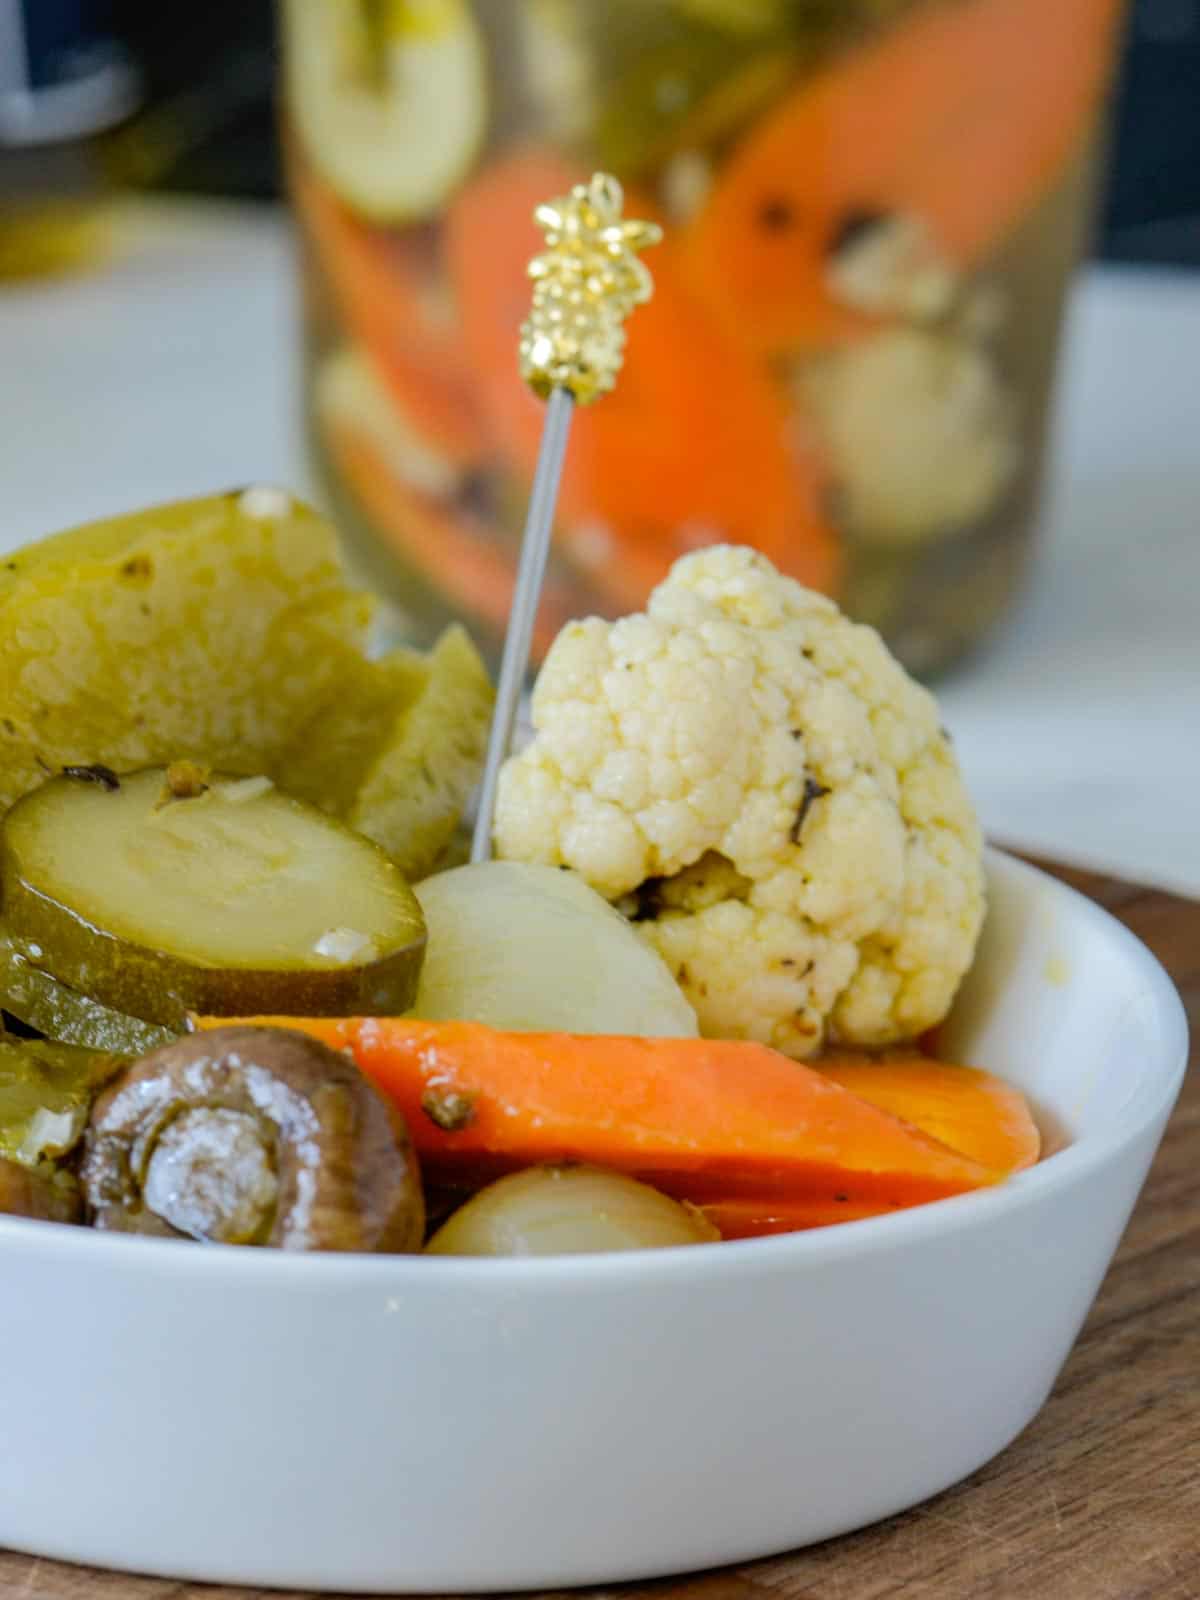 pickled spicy vegetables escabeche